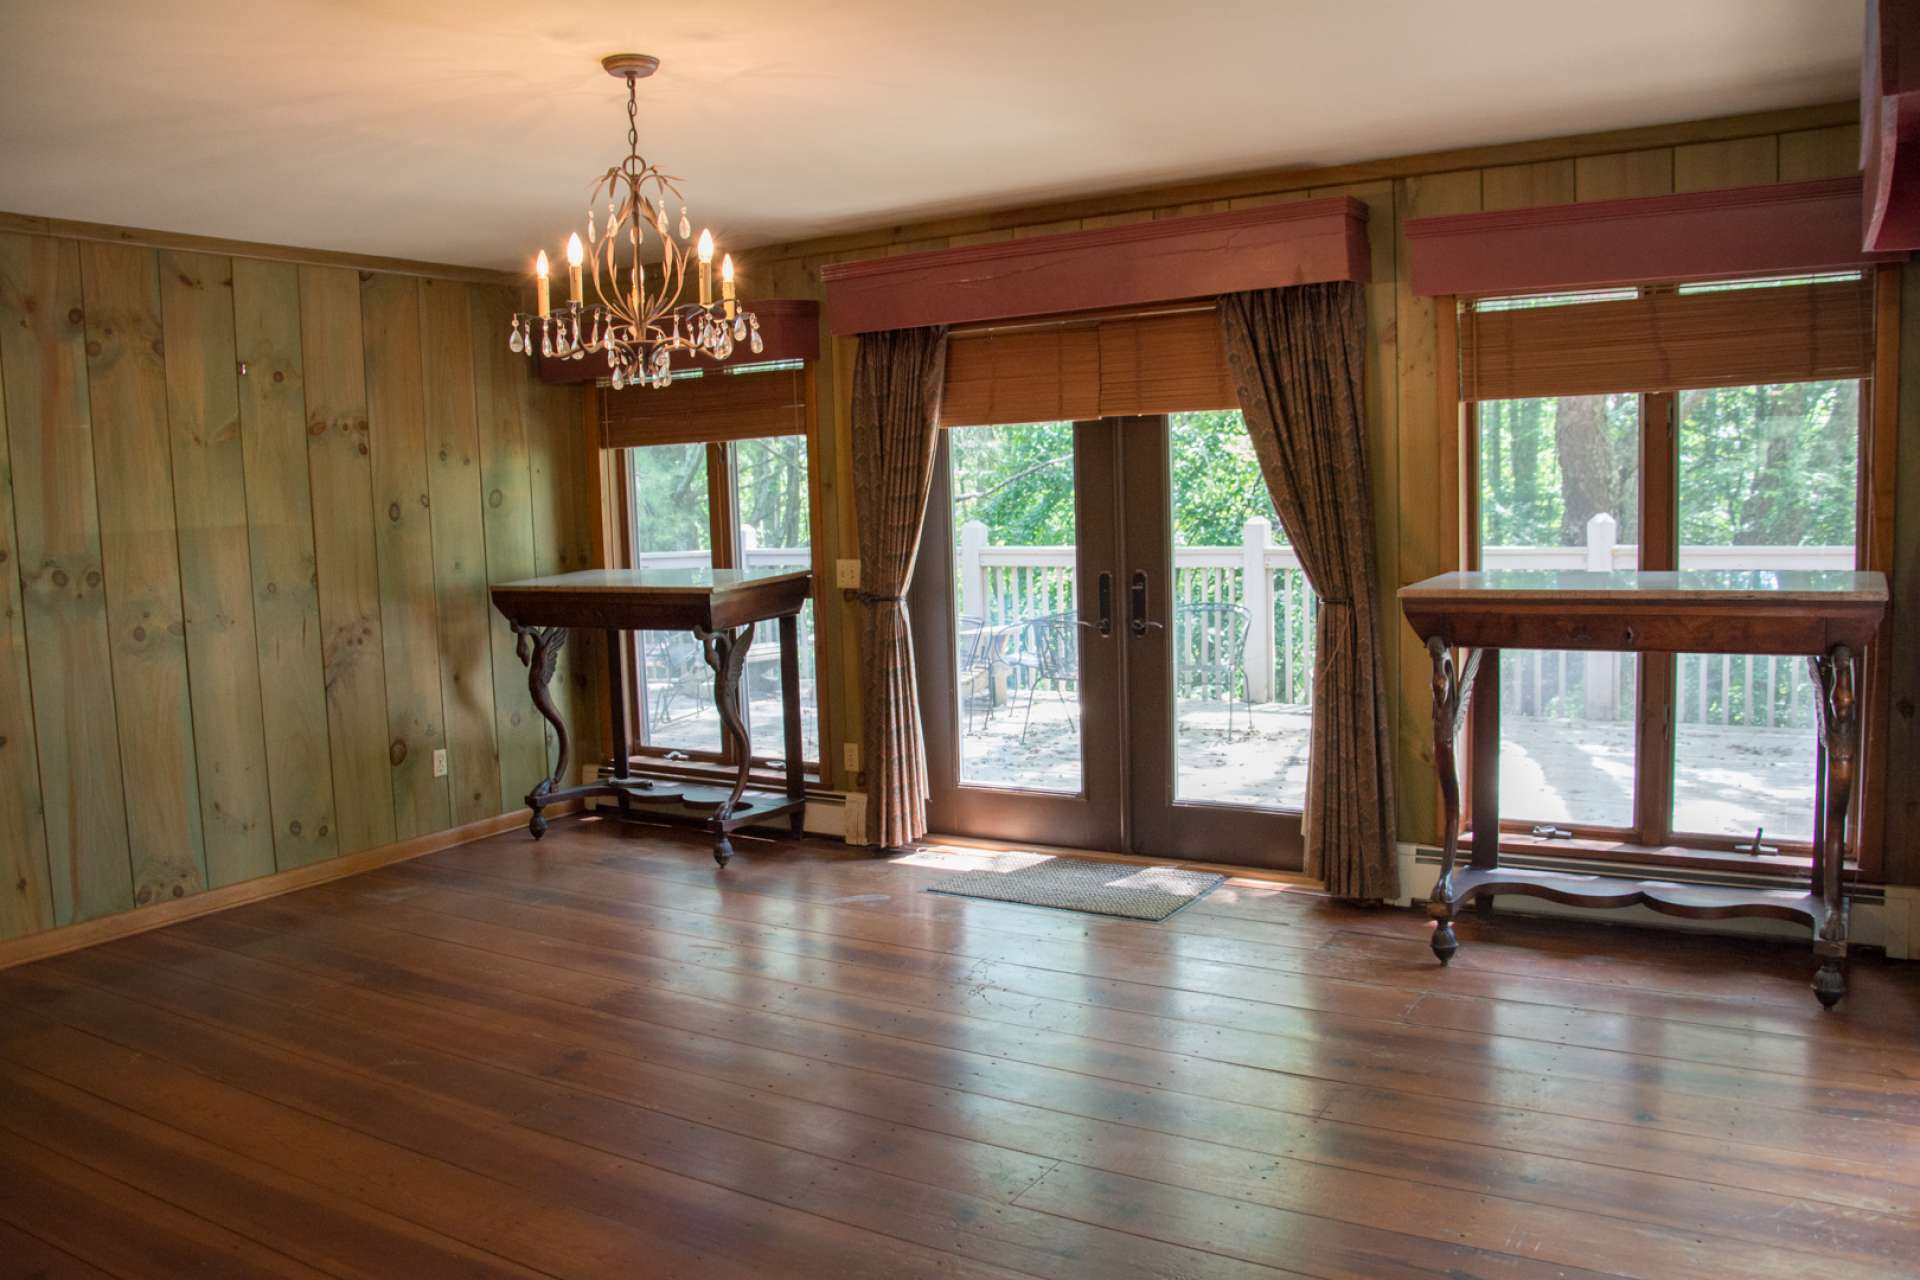 A spacious formal dining area provides a wonderful atmosphere for those special Holiday gatherings.